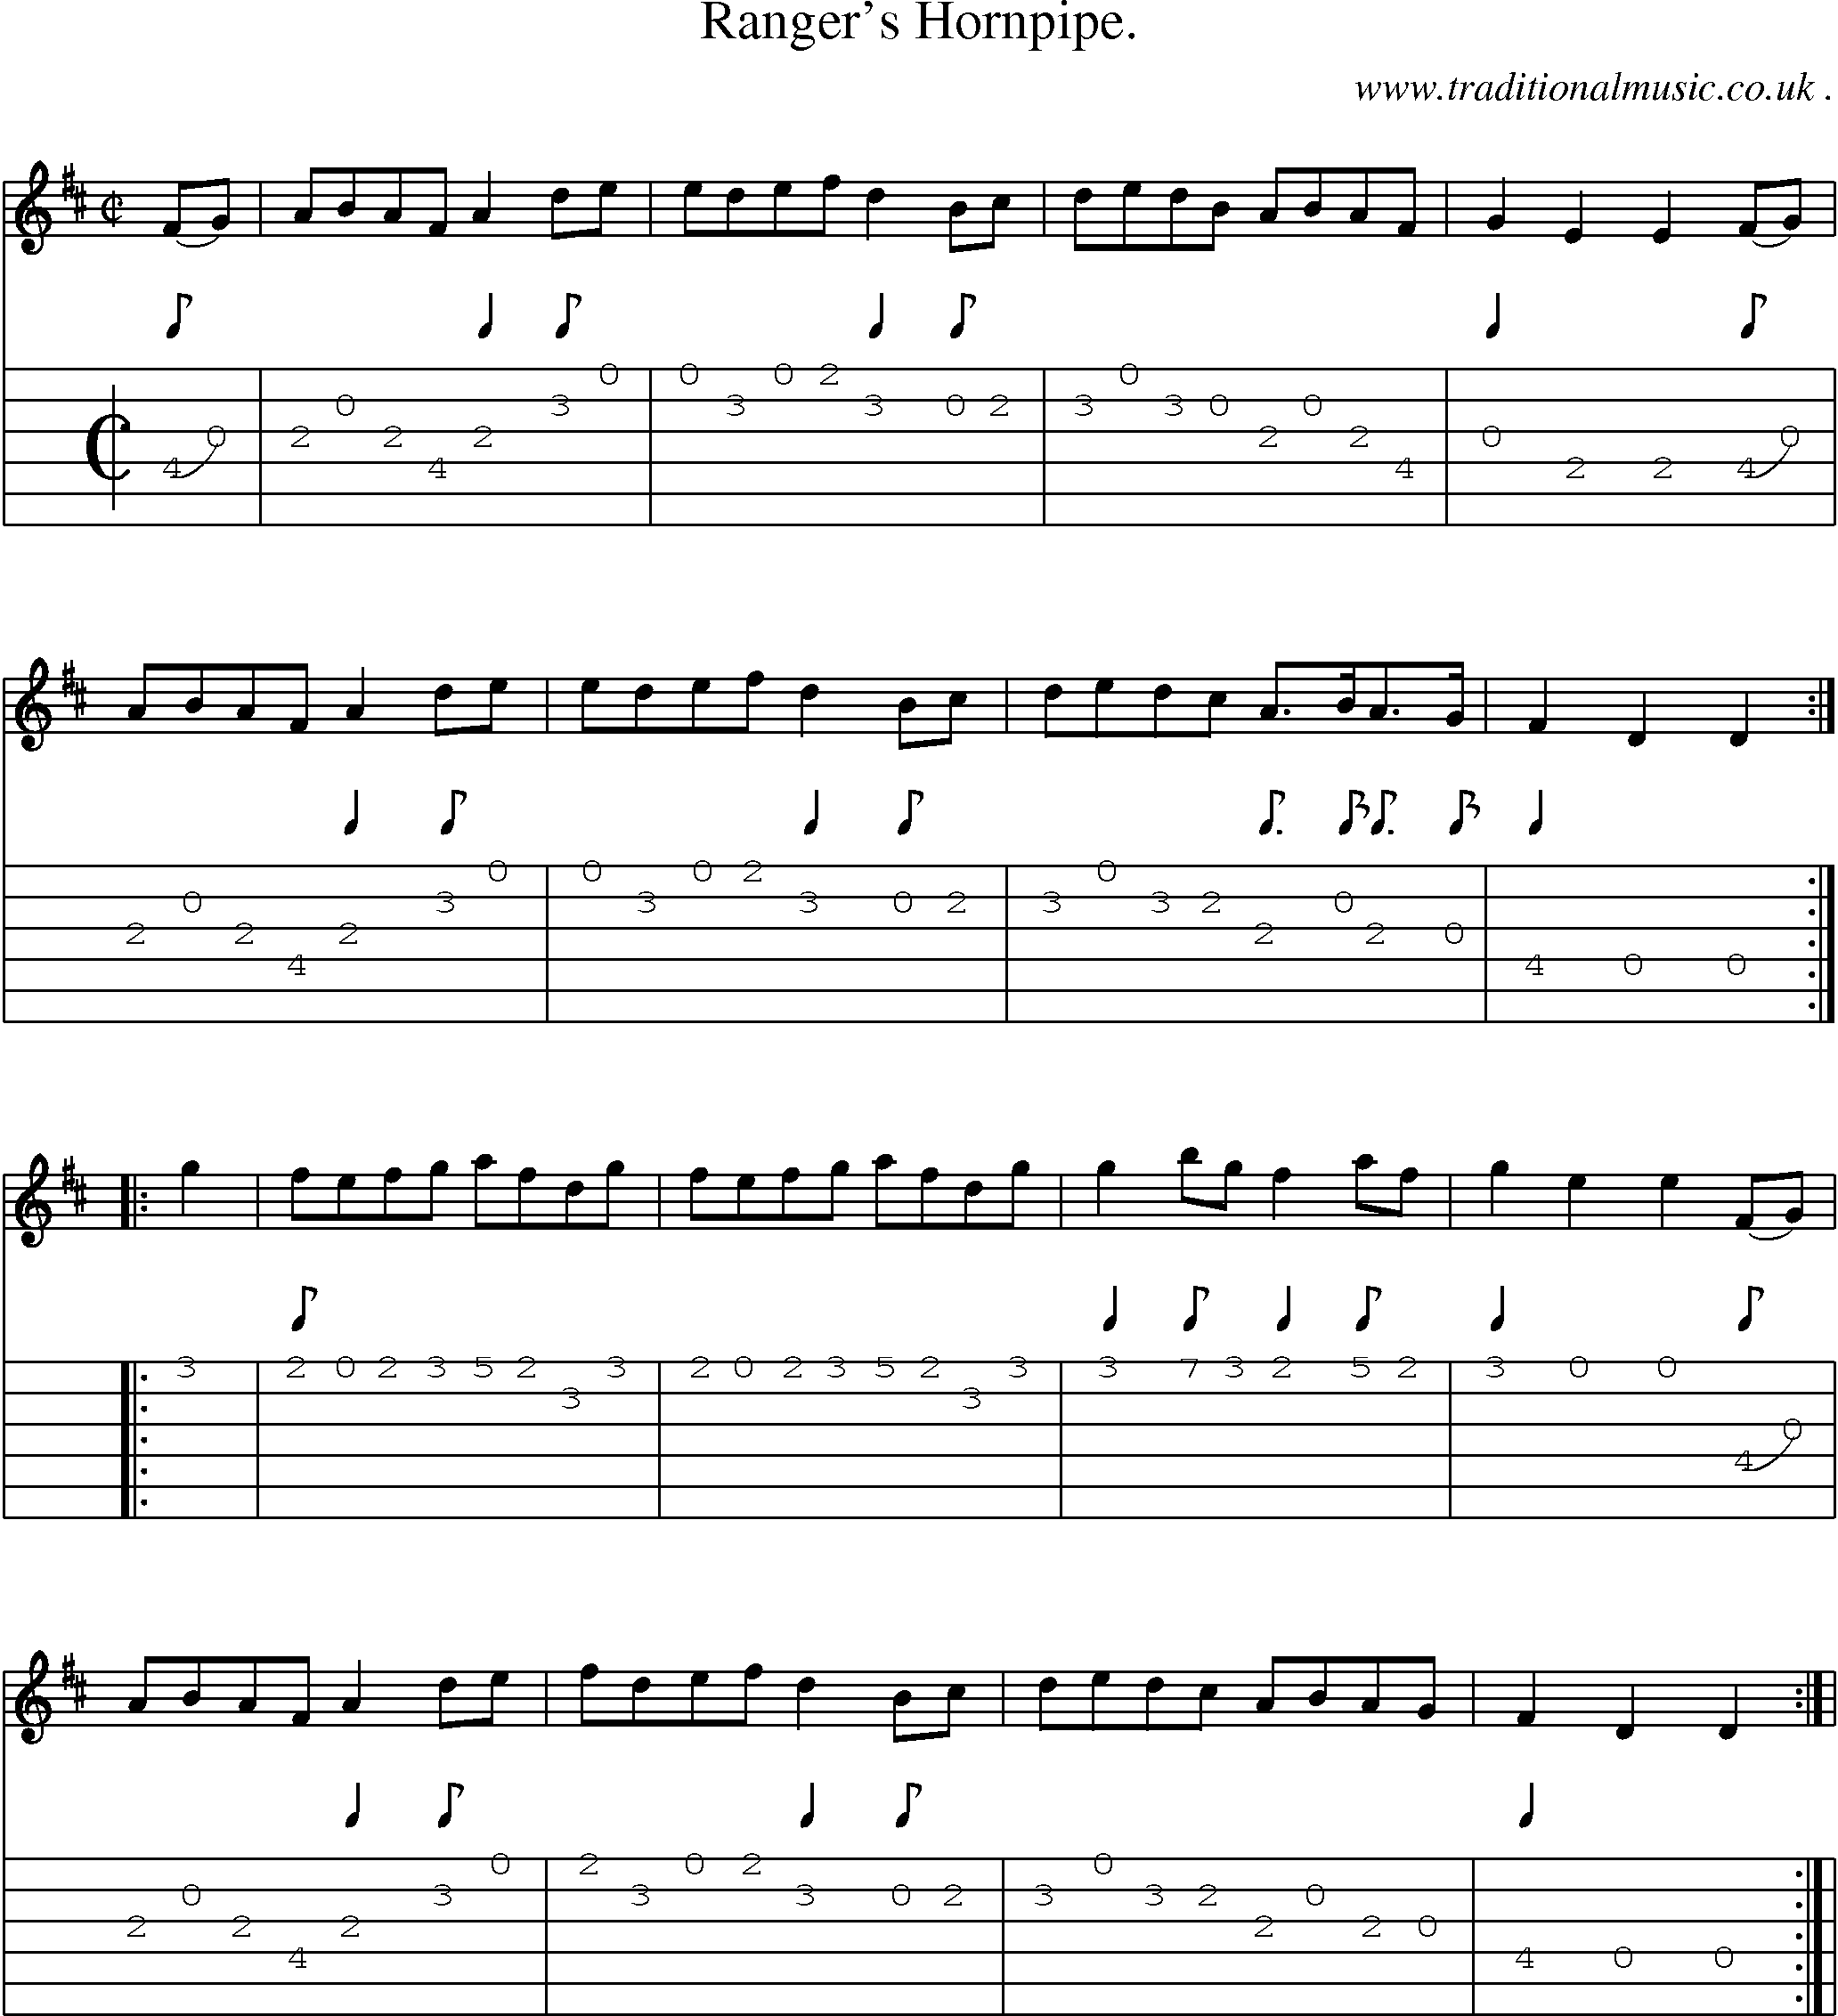 Sheet-Music and Guitar Tabs for Rangers Hornpipe